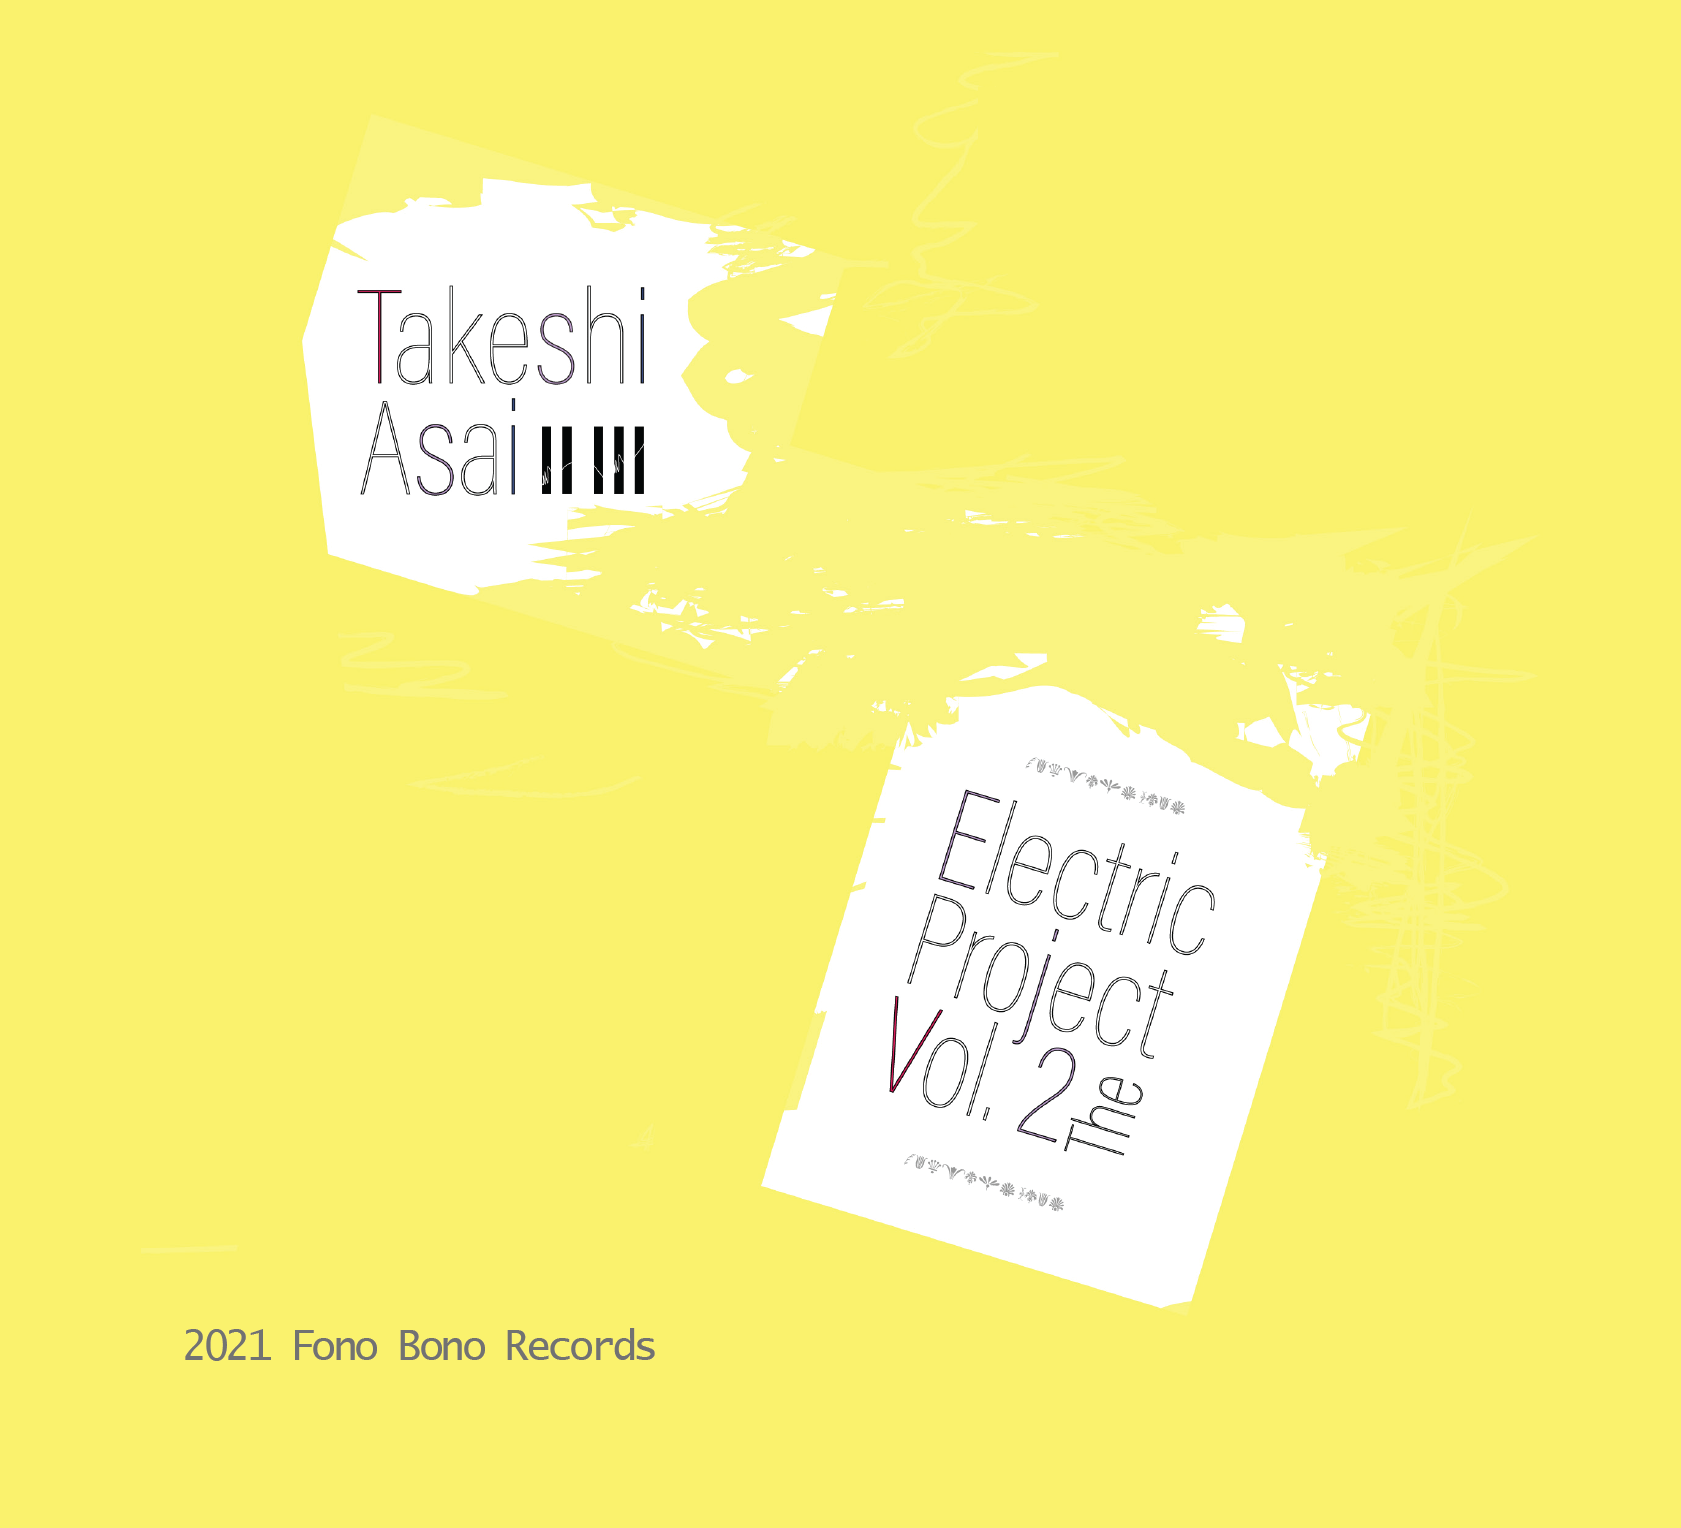 TAKESHI ASAI - The Electric Project Vol. 2 cover 